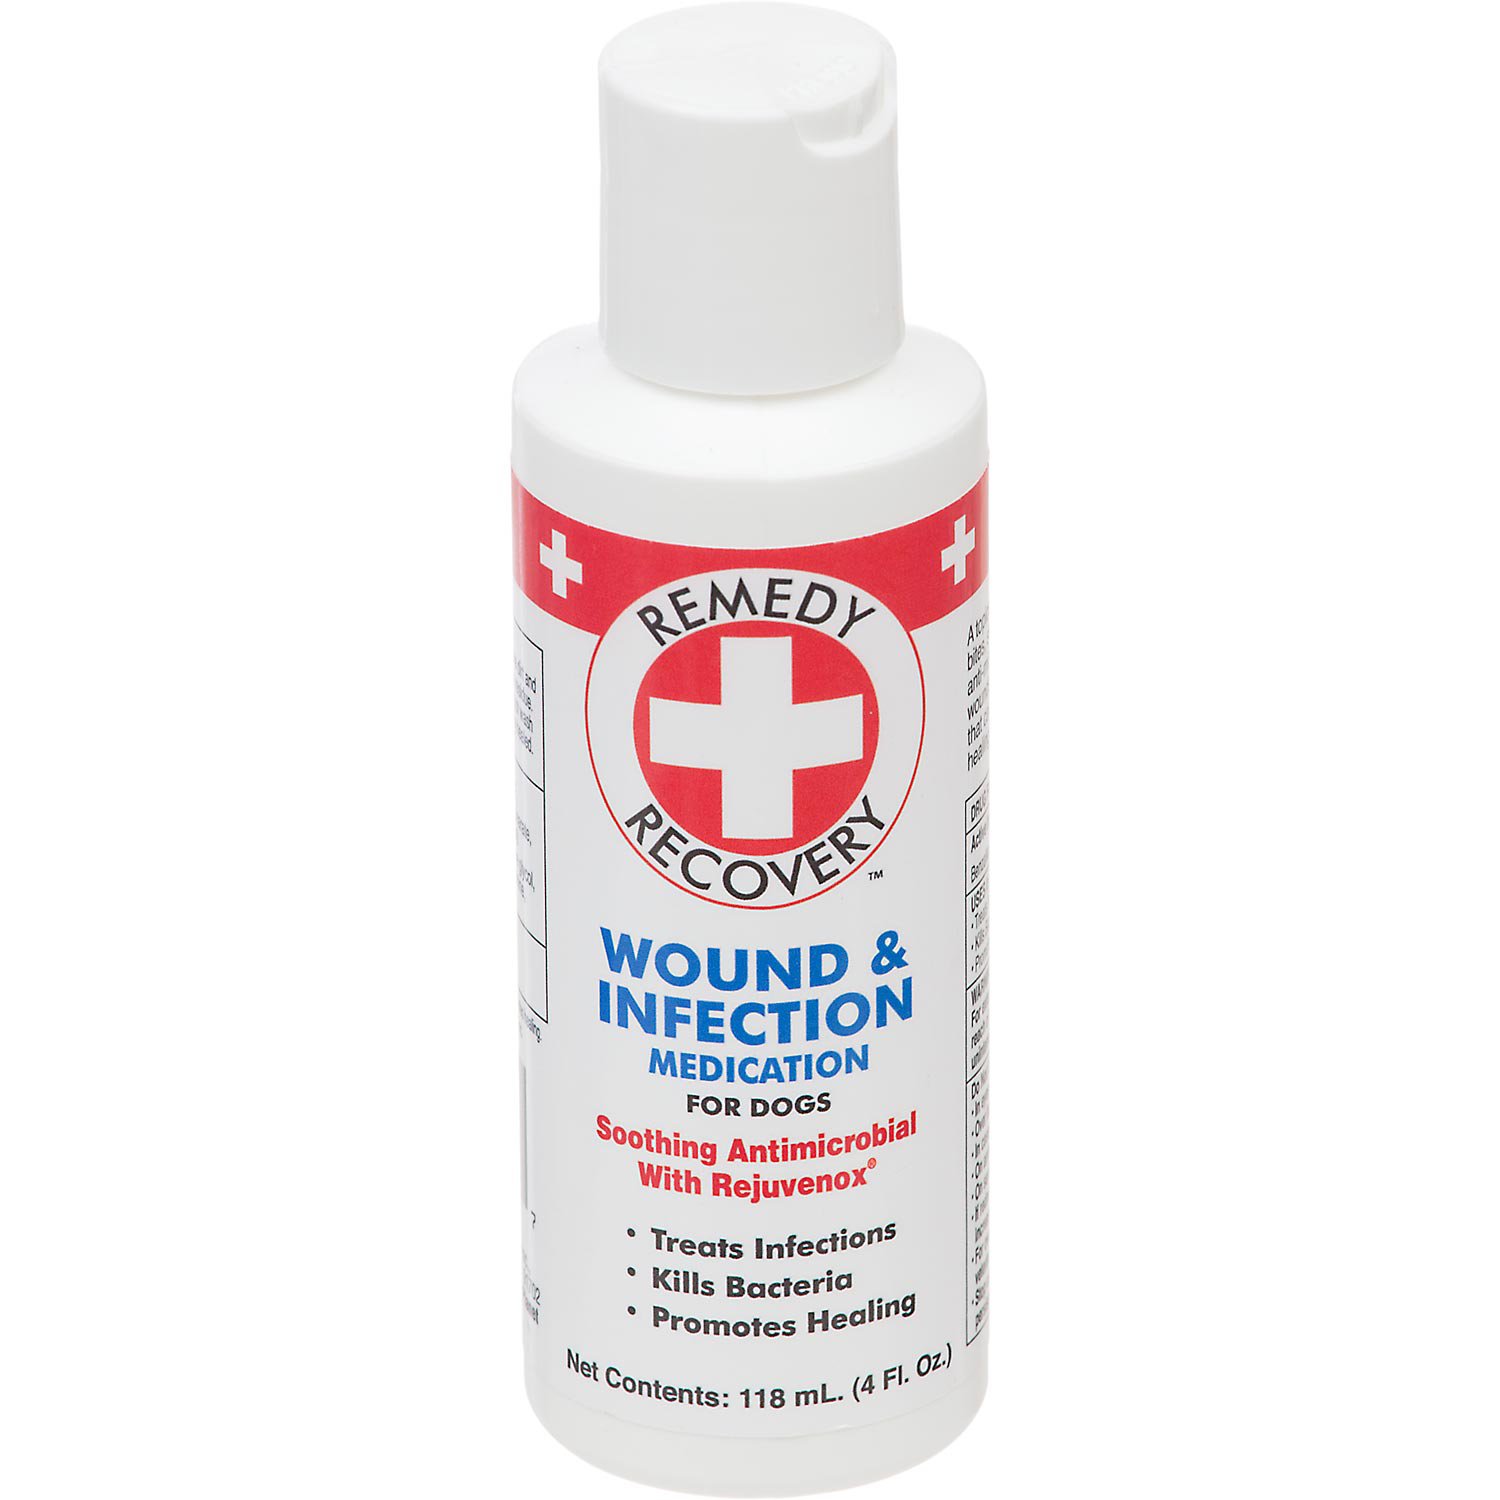 Remedy+Recovery Wound & Infection Medication for Dogs | Petco Store